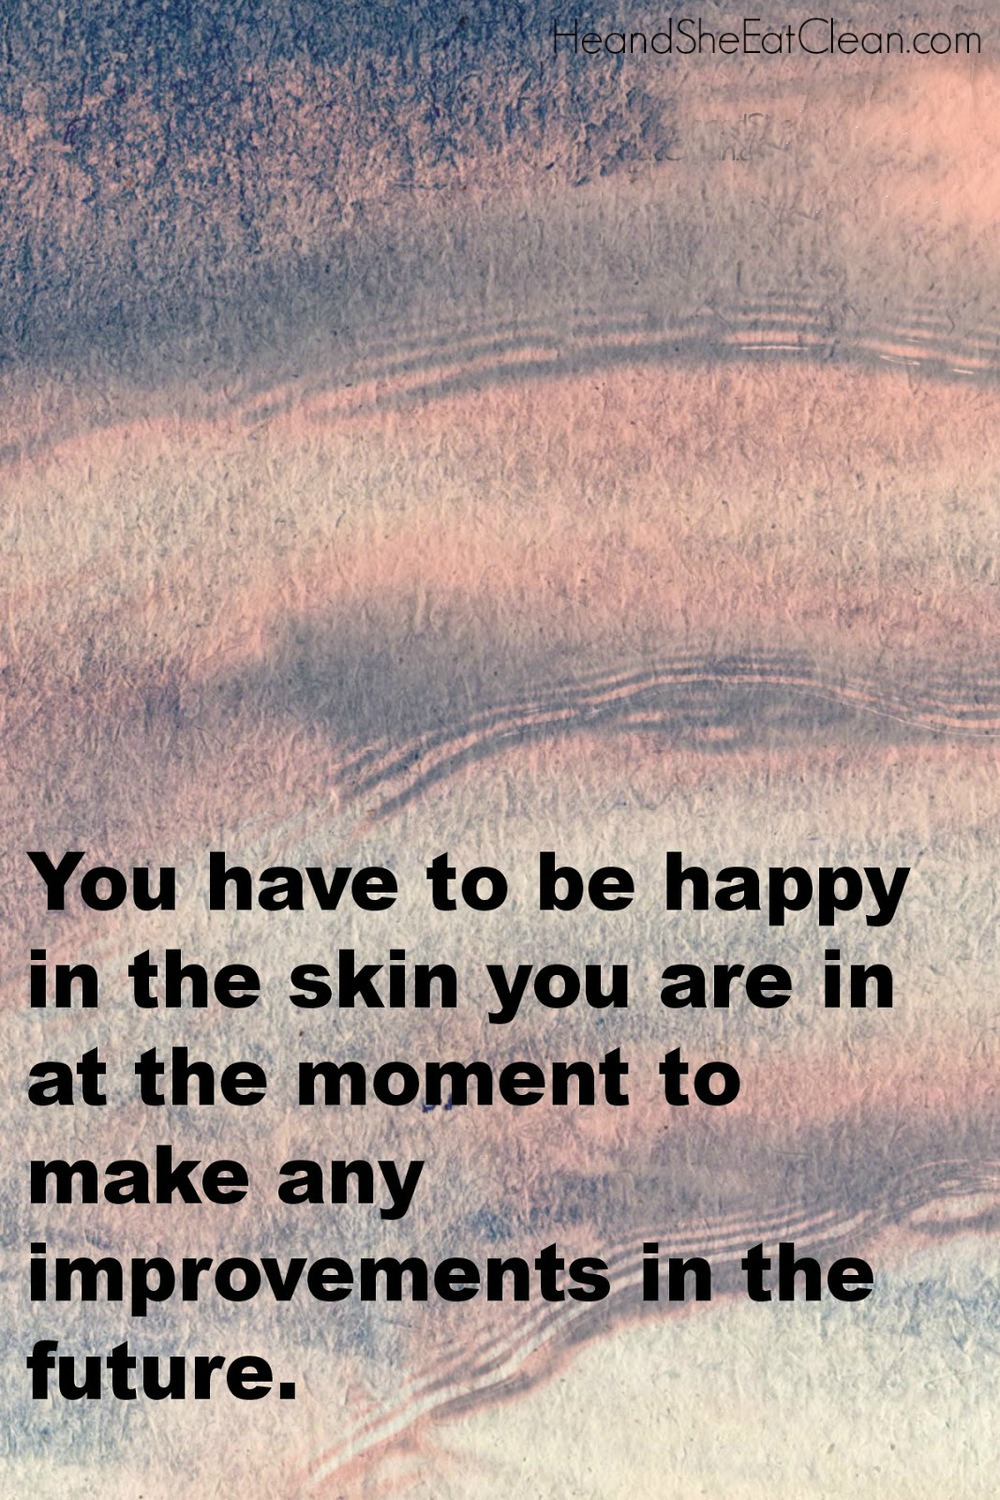 text reads You have to be happy in the skin you are in at the moment to make any improvements in the future